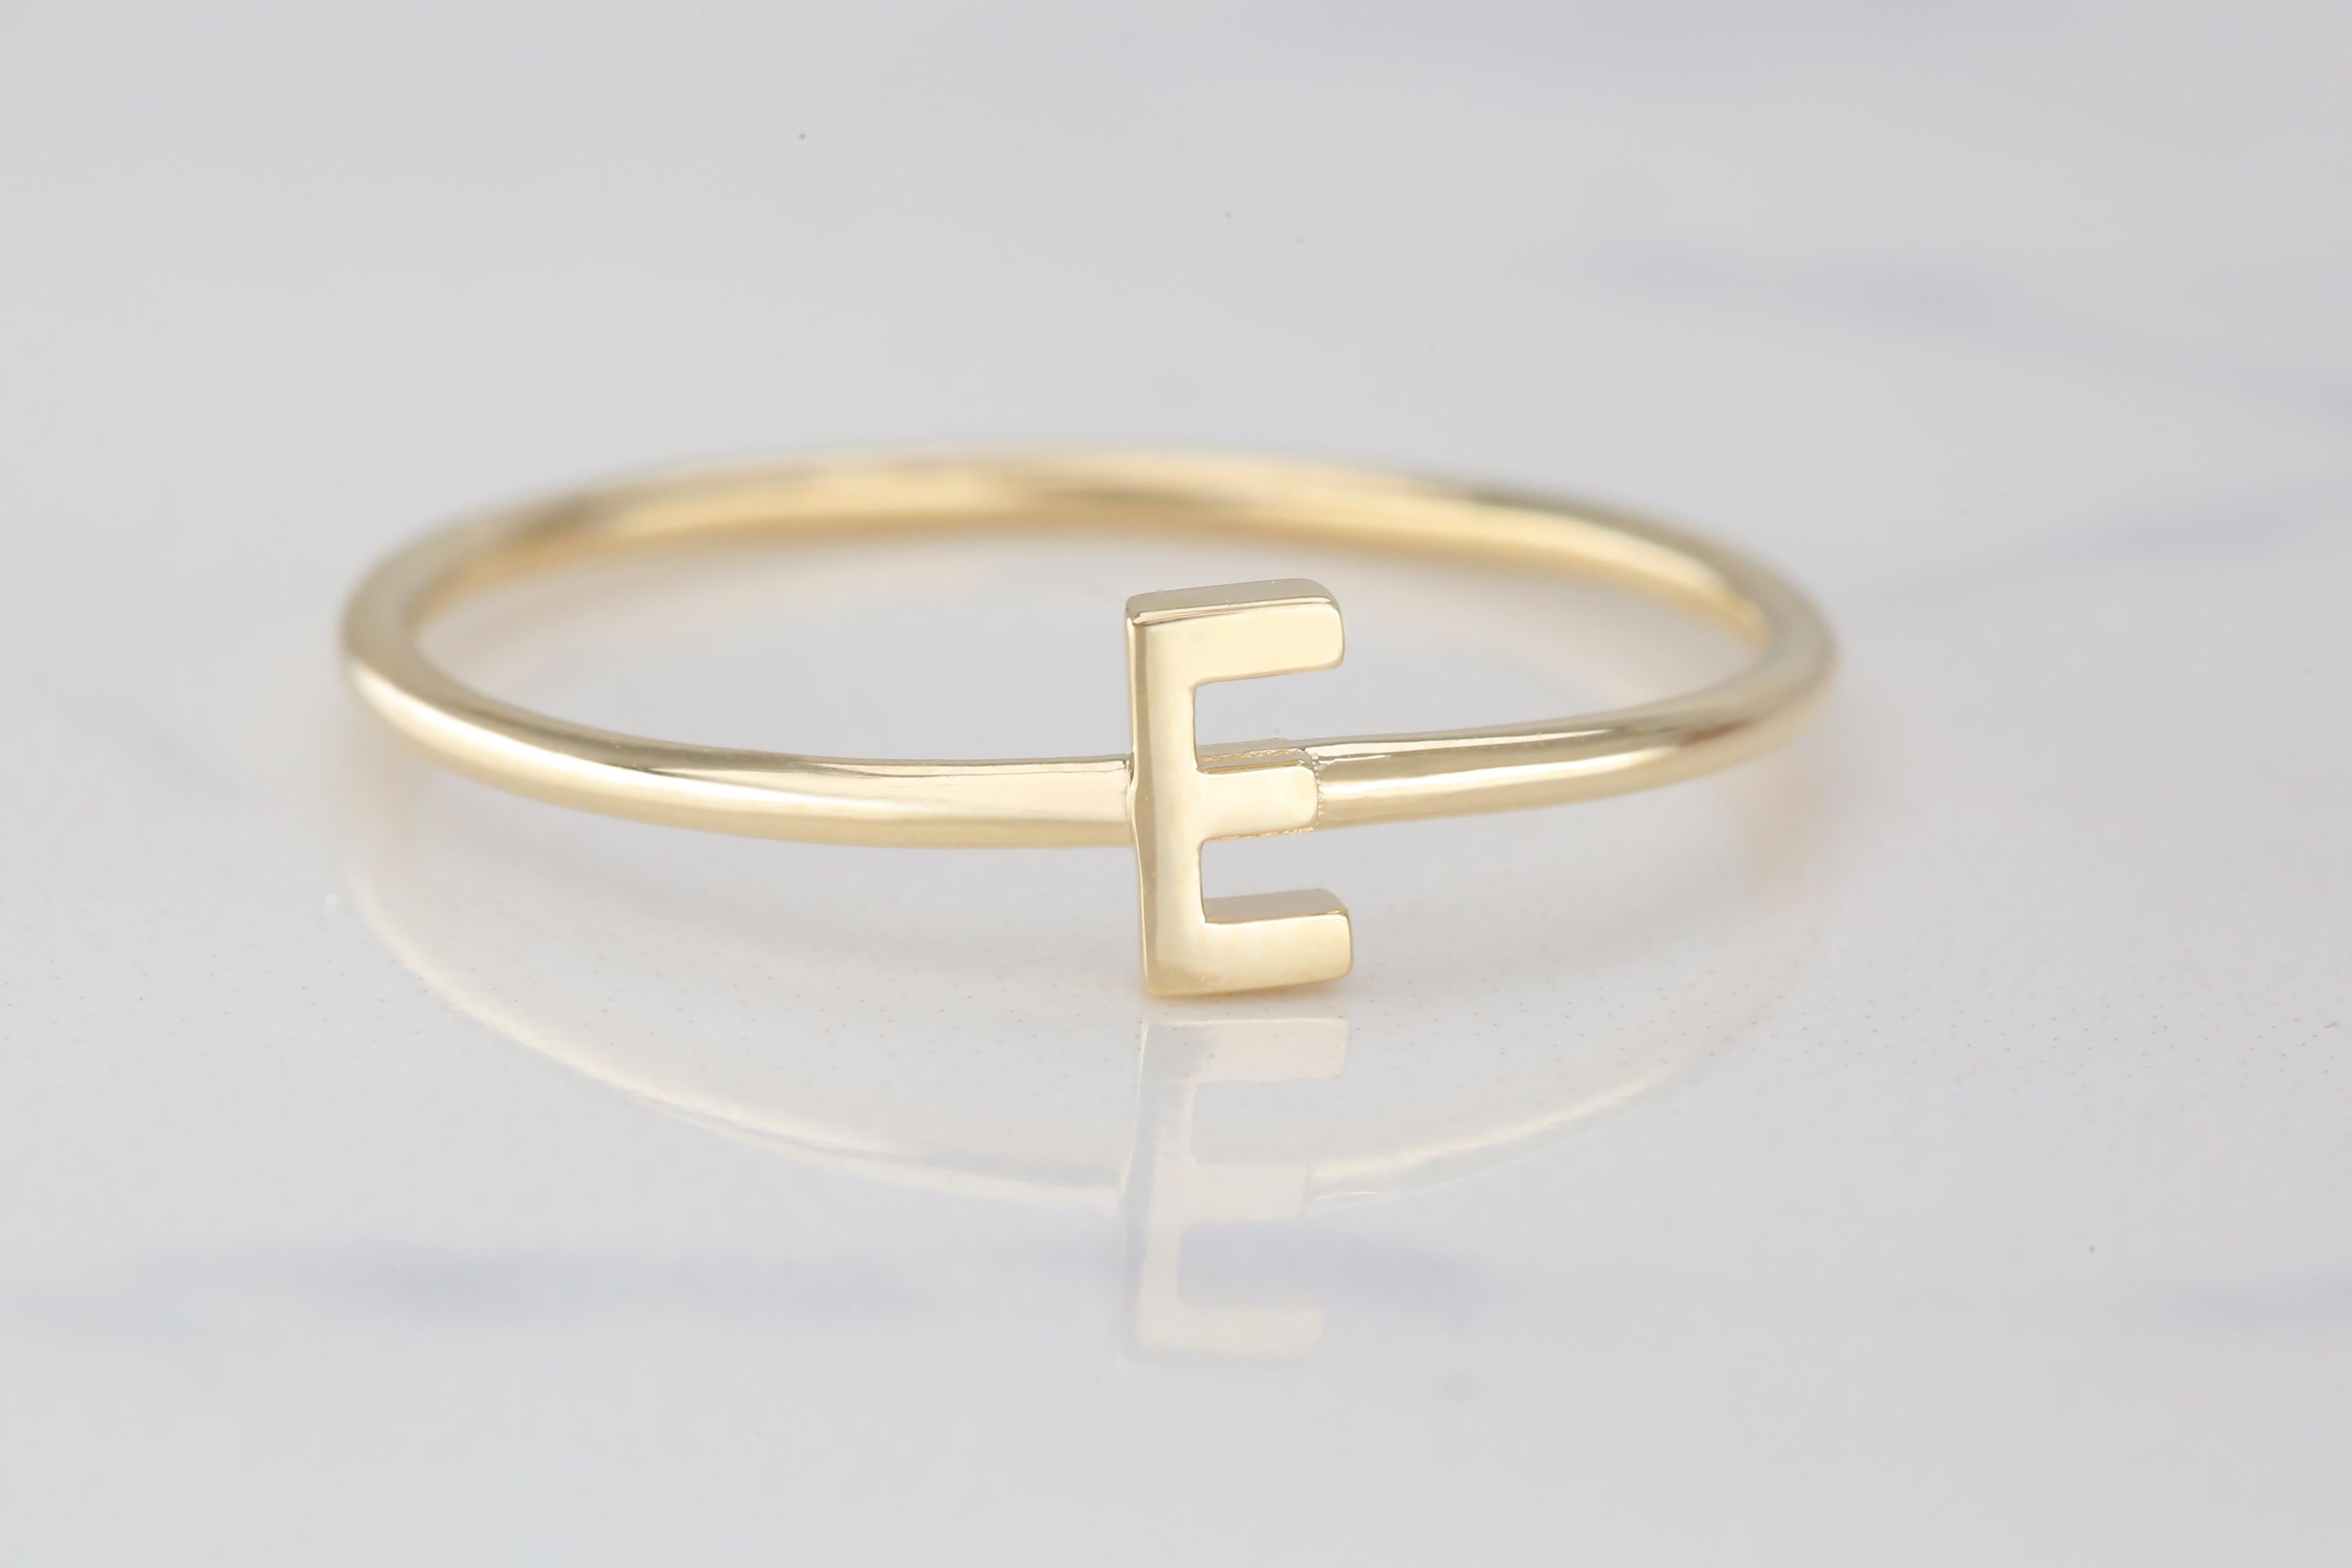 For Sale:  14K Gold Initial E Letter Ring, Personalized Initial Letter Ring 3